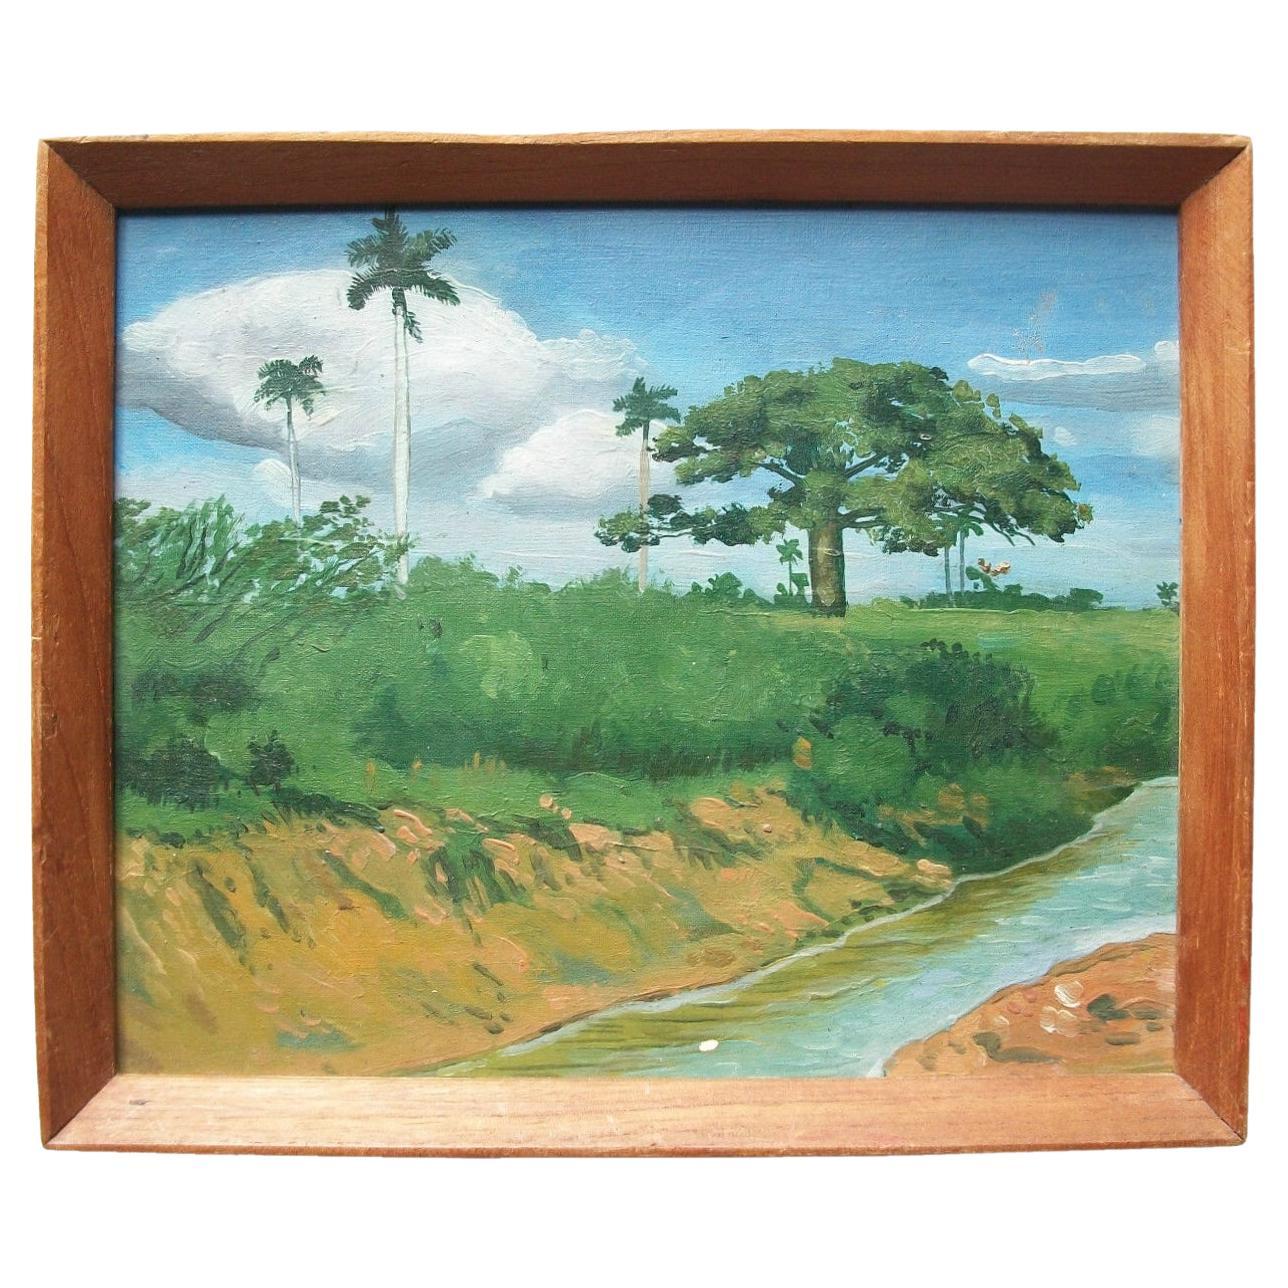 Cuban Contemporary Landscape Oil Painting on Canvas - Unsigned - Late 20th C. For Sale